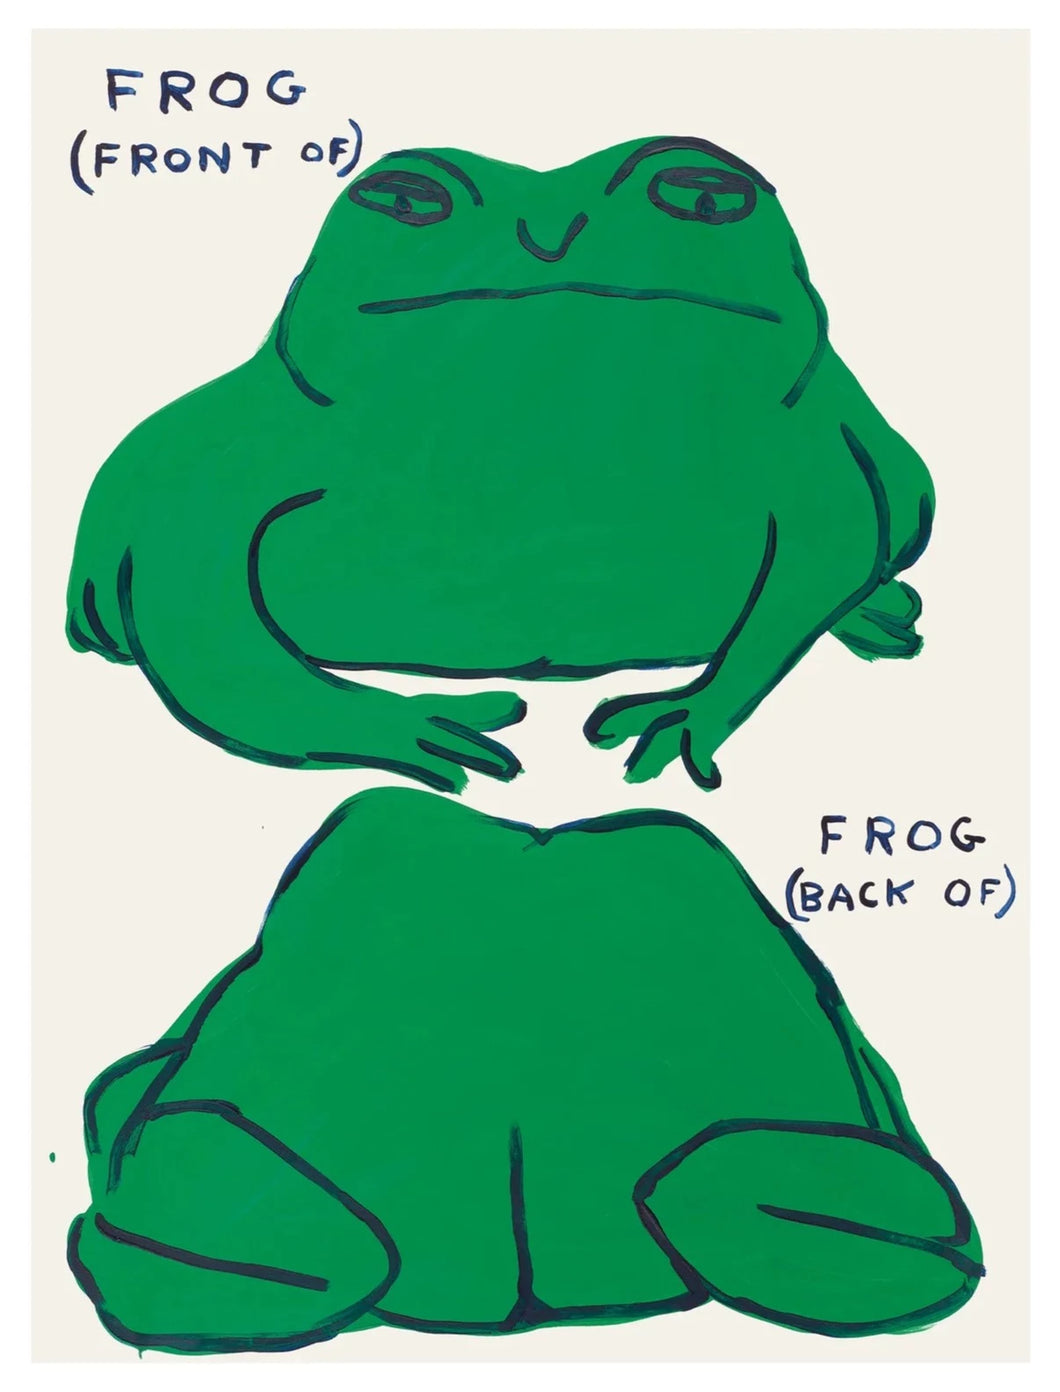 Frog (Front Of), Frog (Back Of)